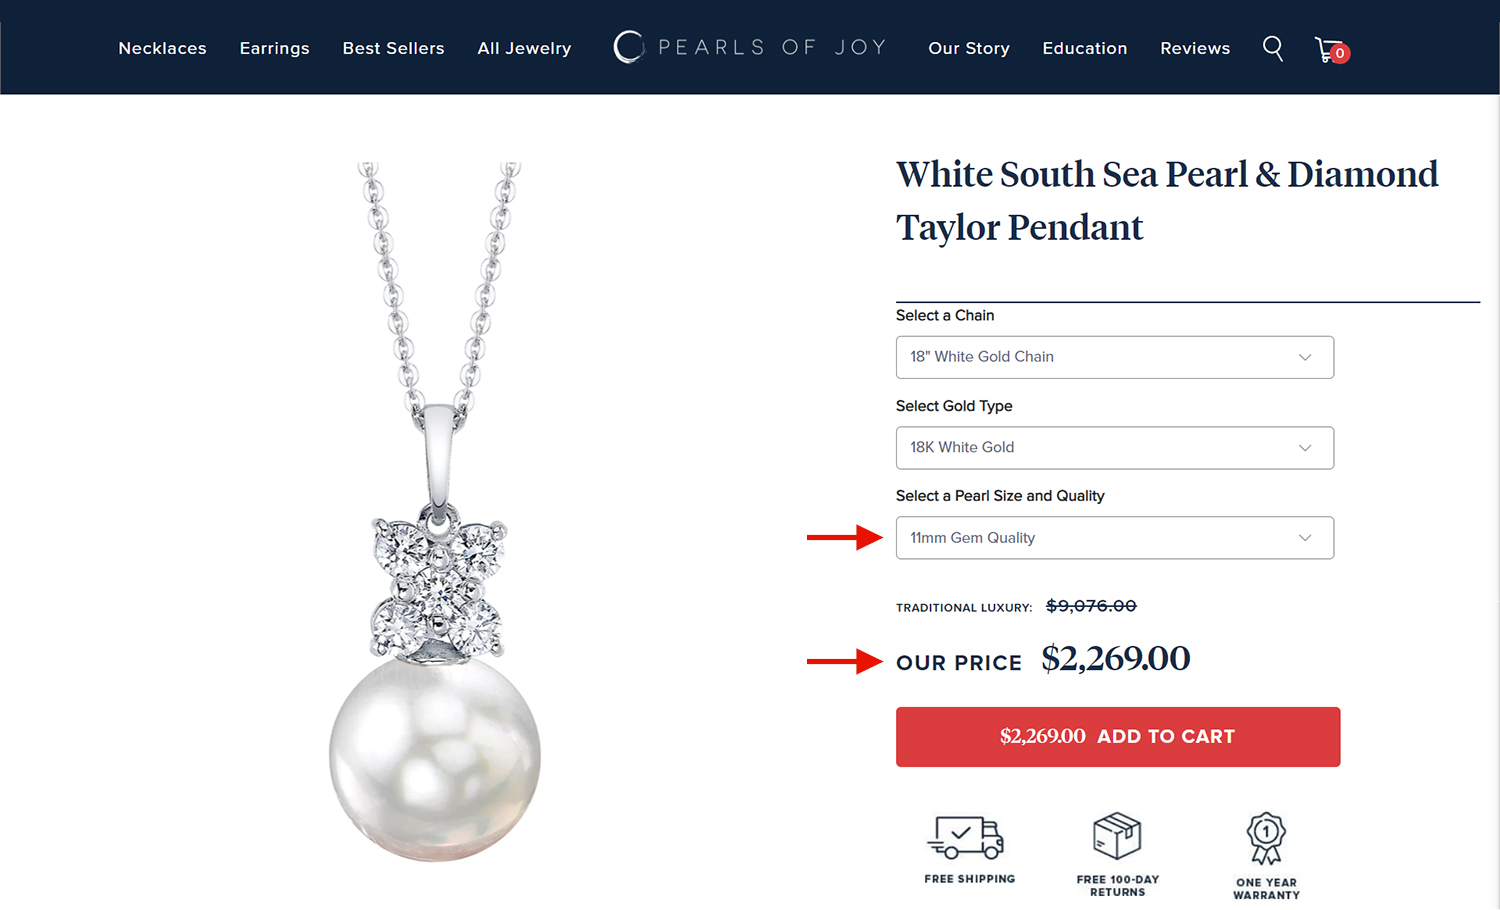 White South Sea pearl and Diamond Taylor Pendant from Pearls of Joy features a similar design to the Tiffany Victoria Collection but at nearly half the cost